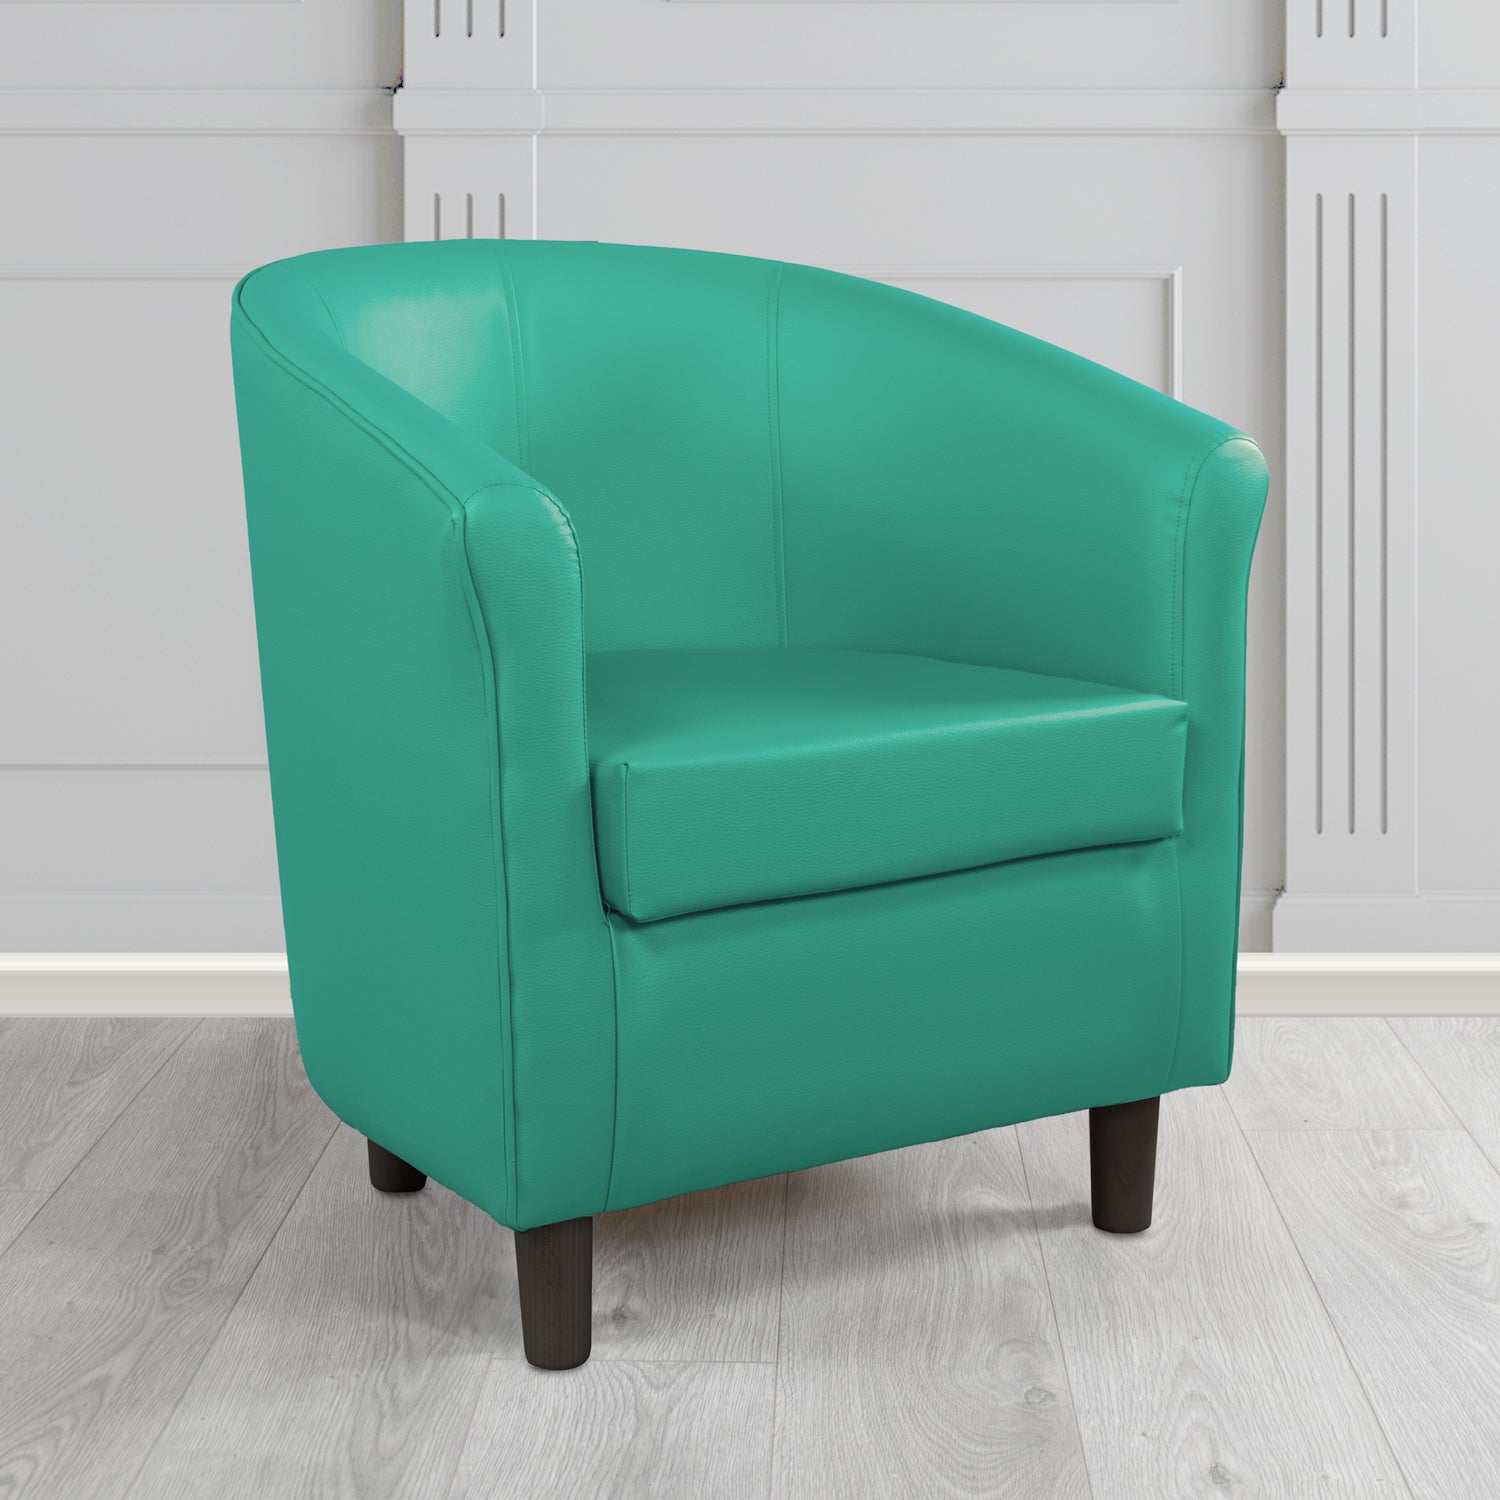 Tuscany Just Colour Sea Green Antimicrobial Crib 5 Contract Faux Leather Tub Chair - The Tub Chair Shop